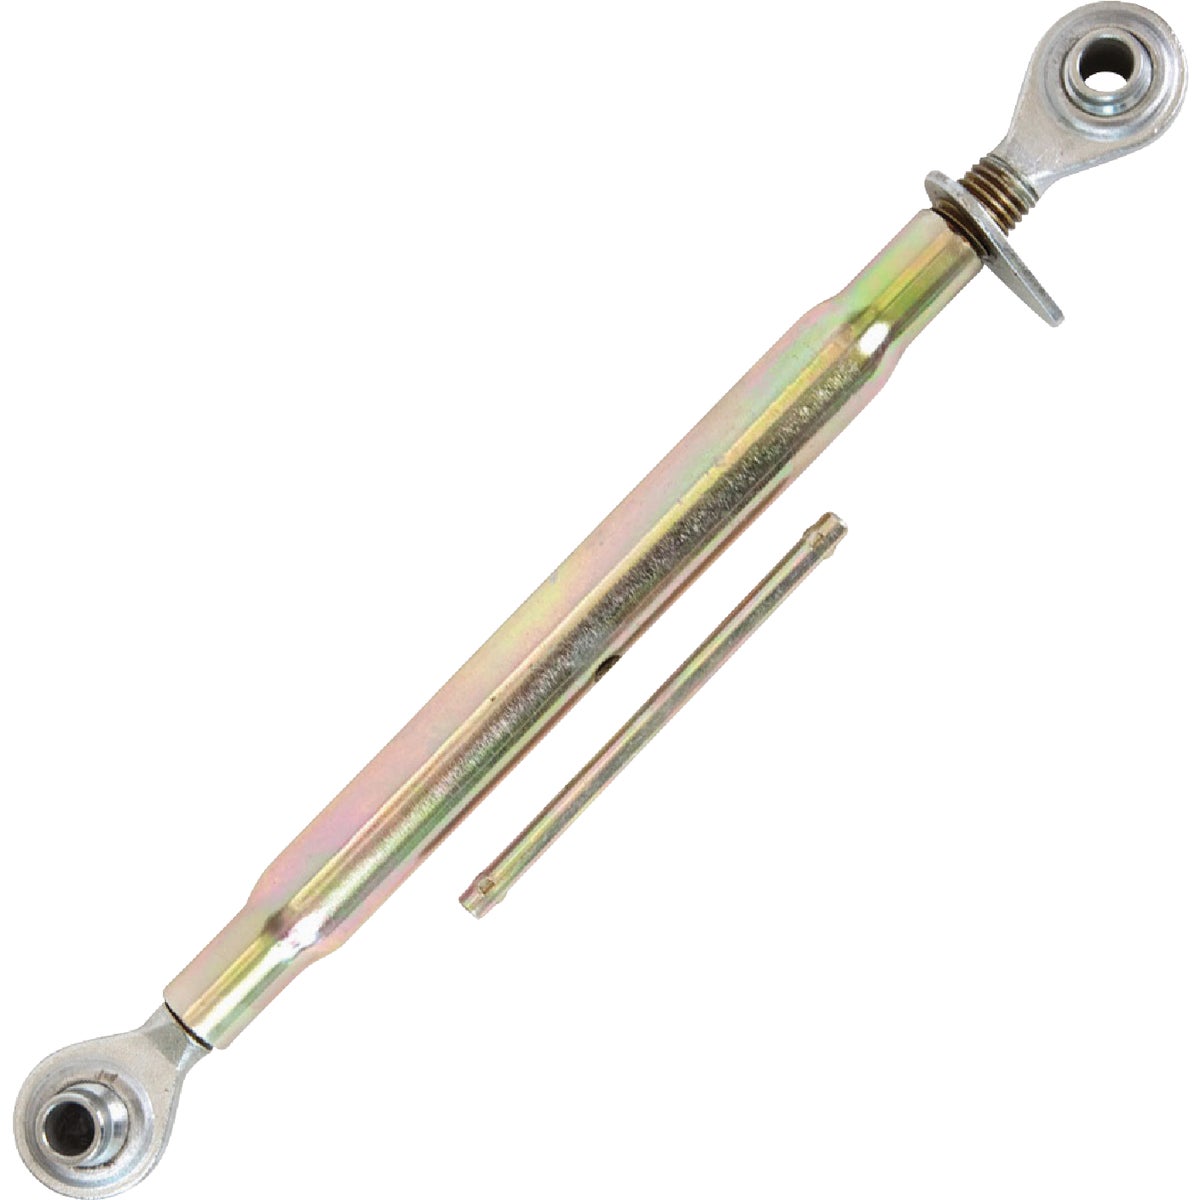 Item 759595, Yellow zinc plated top link. Available for category 0 through 3 tractors.